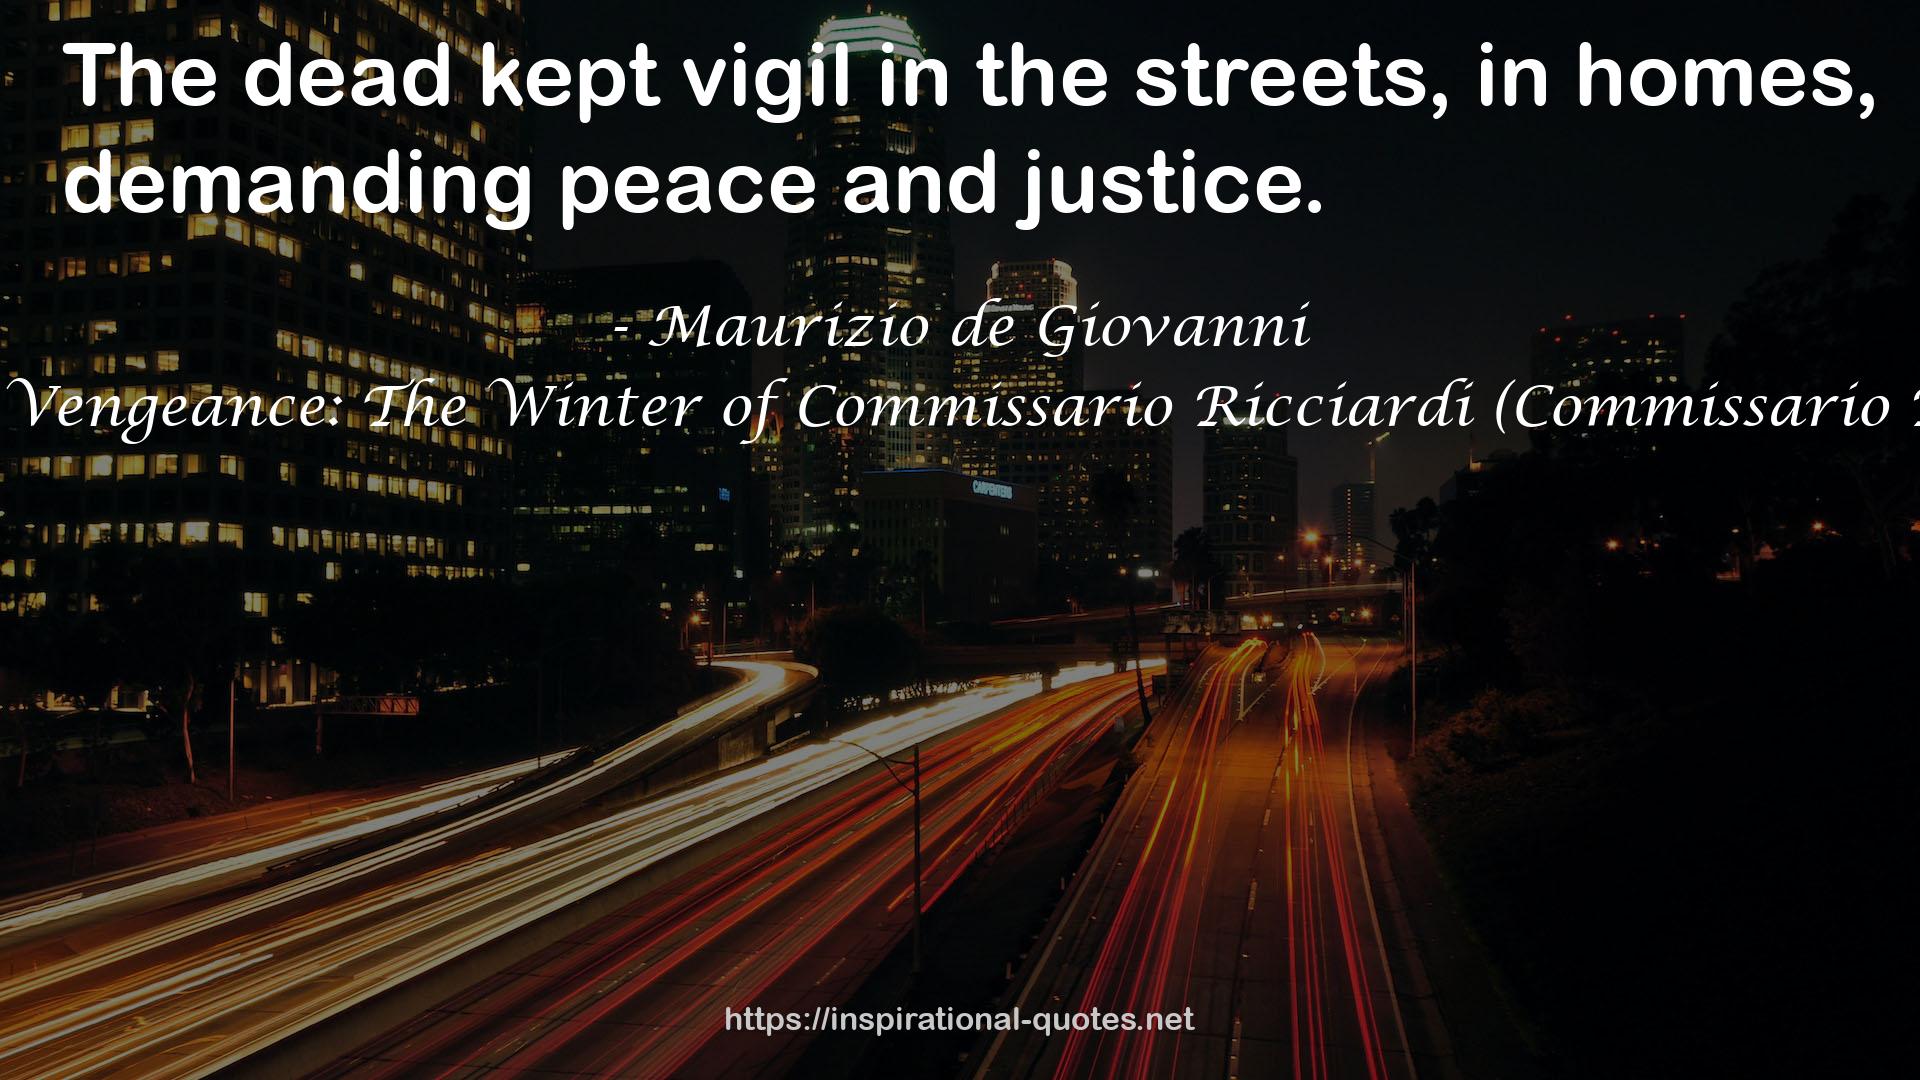 I Will Have Vengeance: The Winter of Commissario Ricciardi (Commissario Ricciardi #1) QUOTES